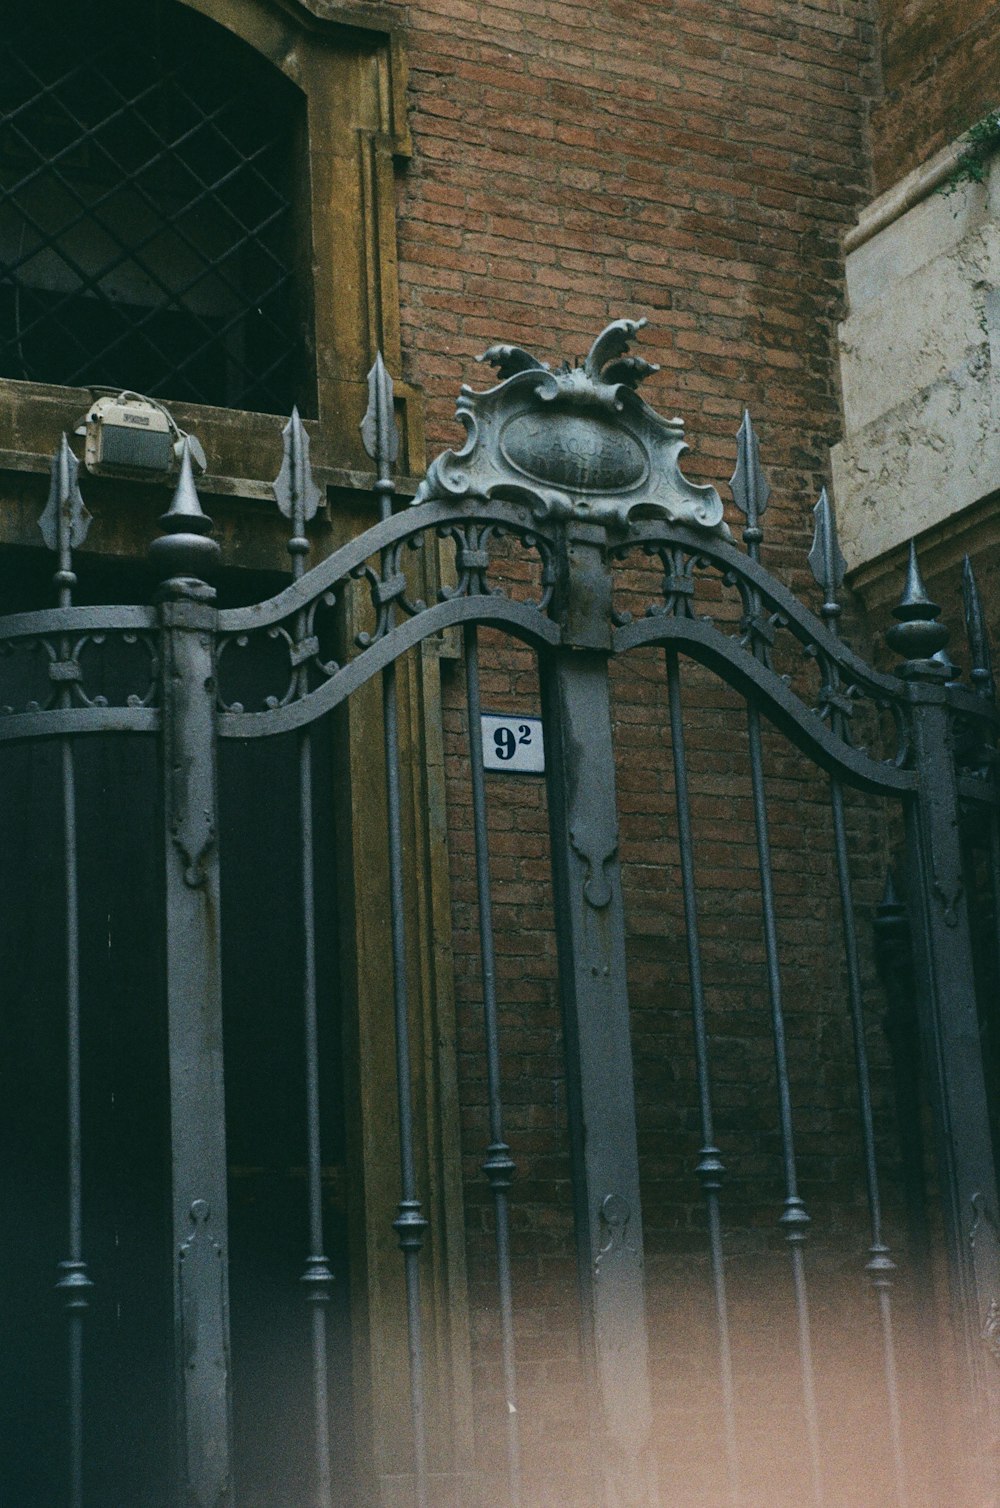 an iron gate with a clock on it in front of a brick building